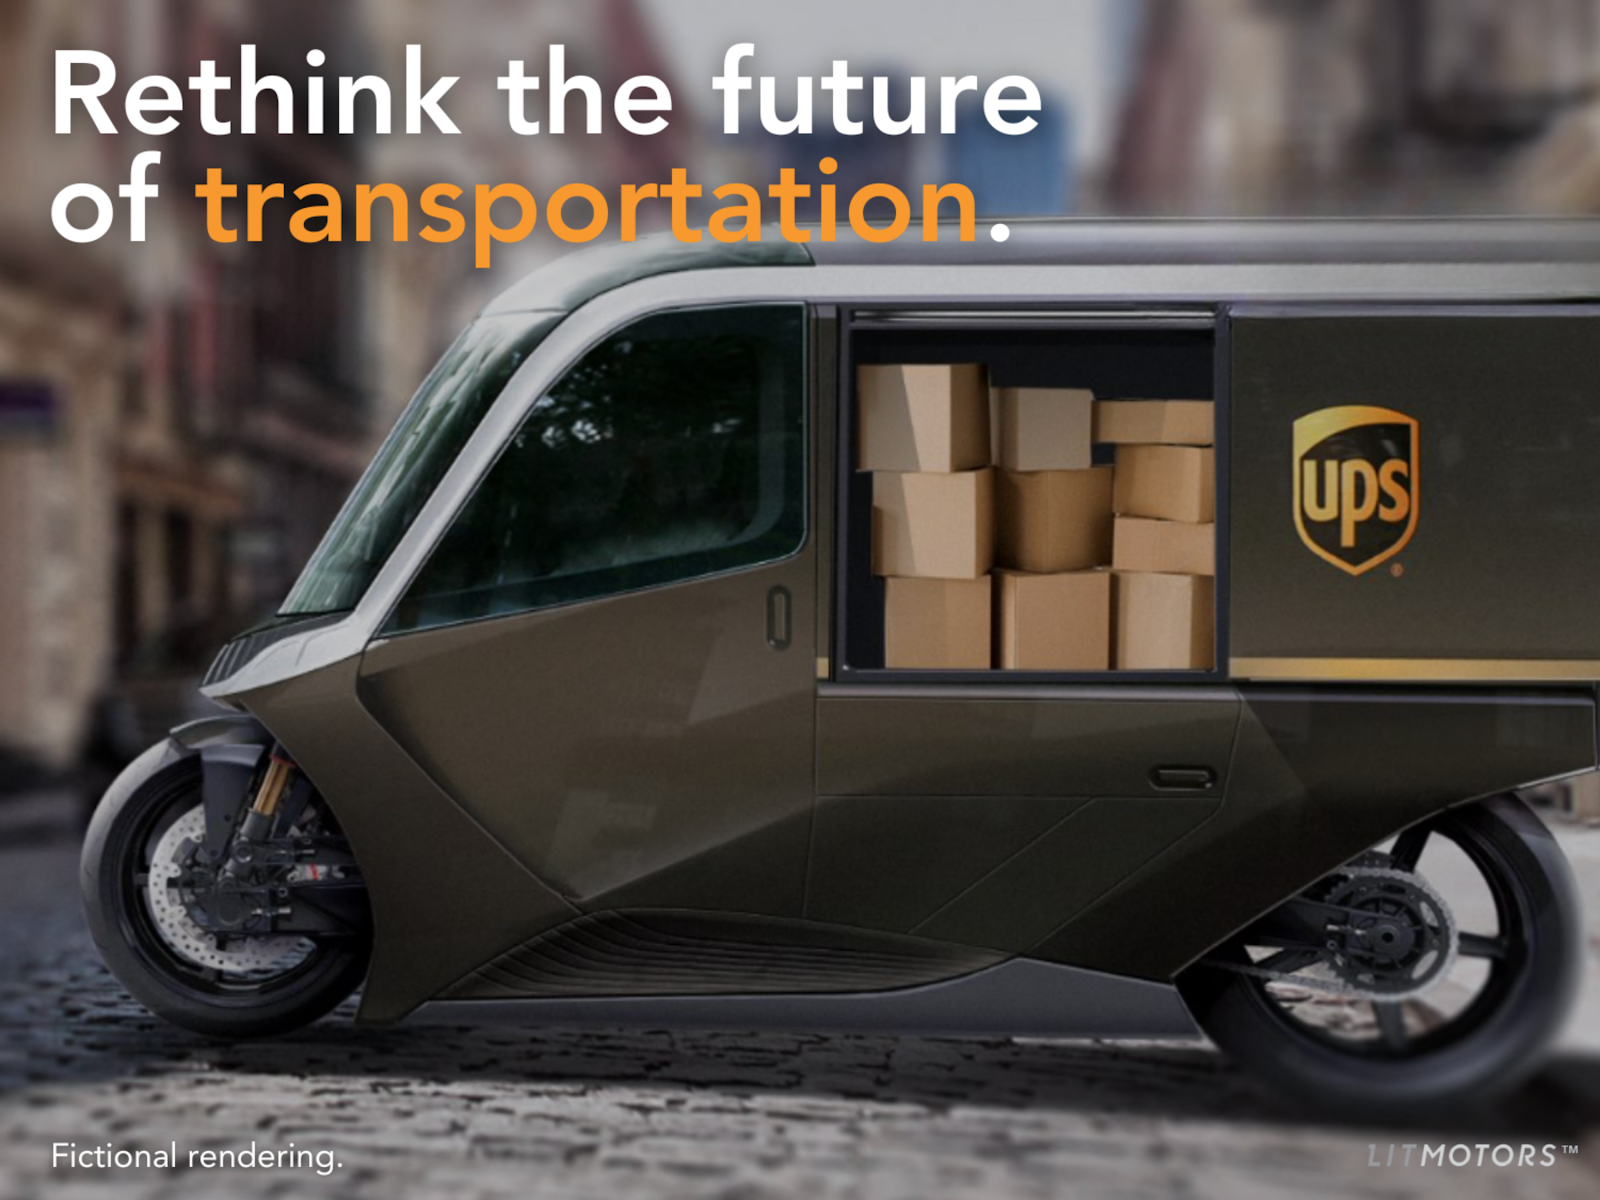 Fictional rendering of UPS truck balancing on two wheels in cityscape.